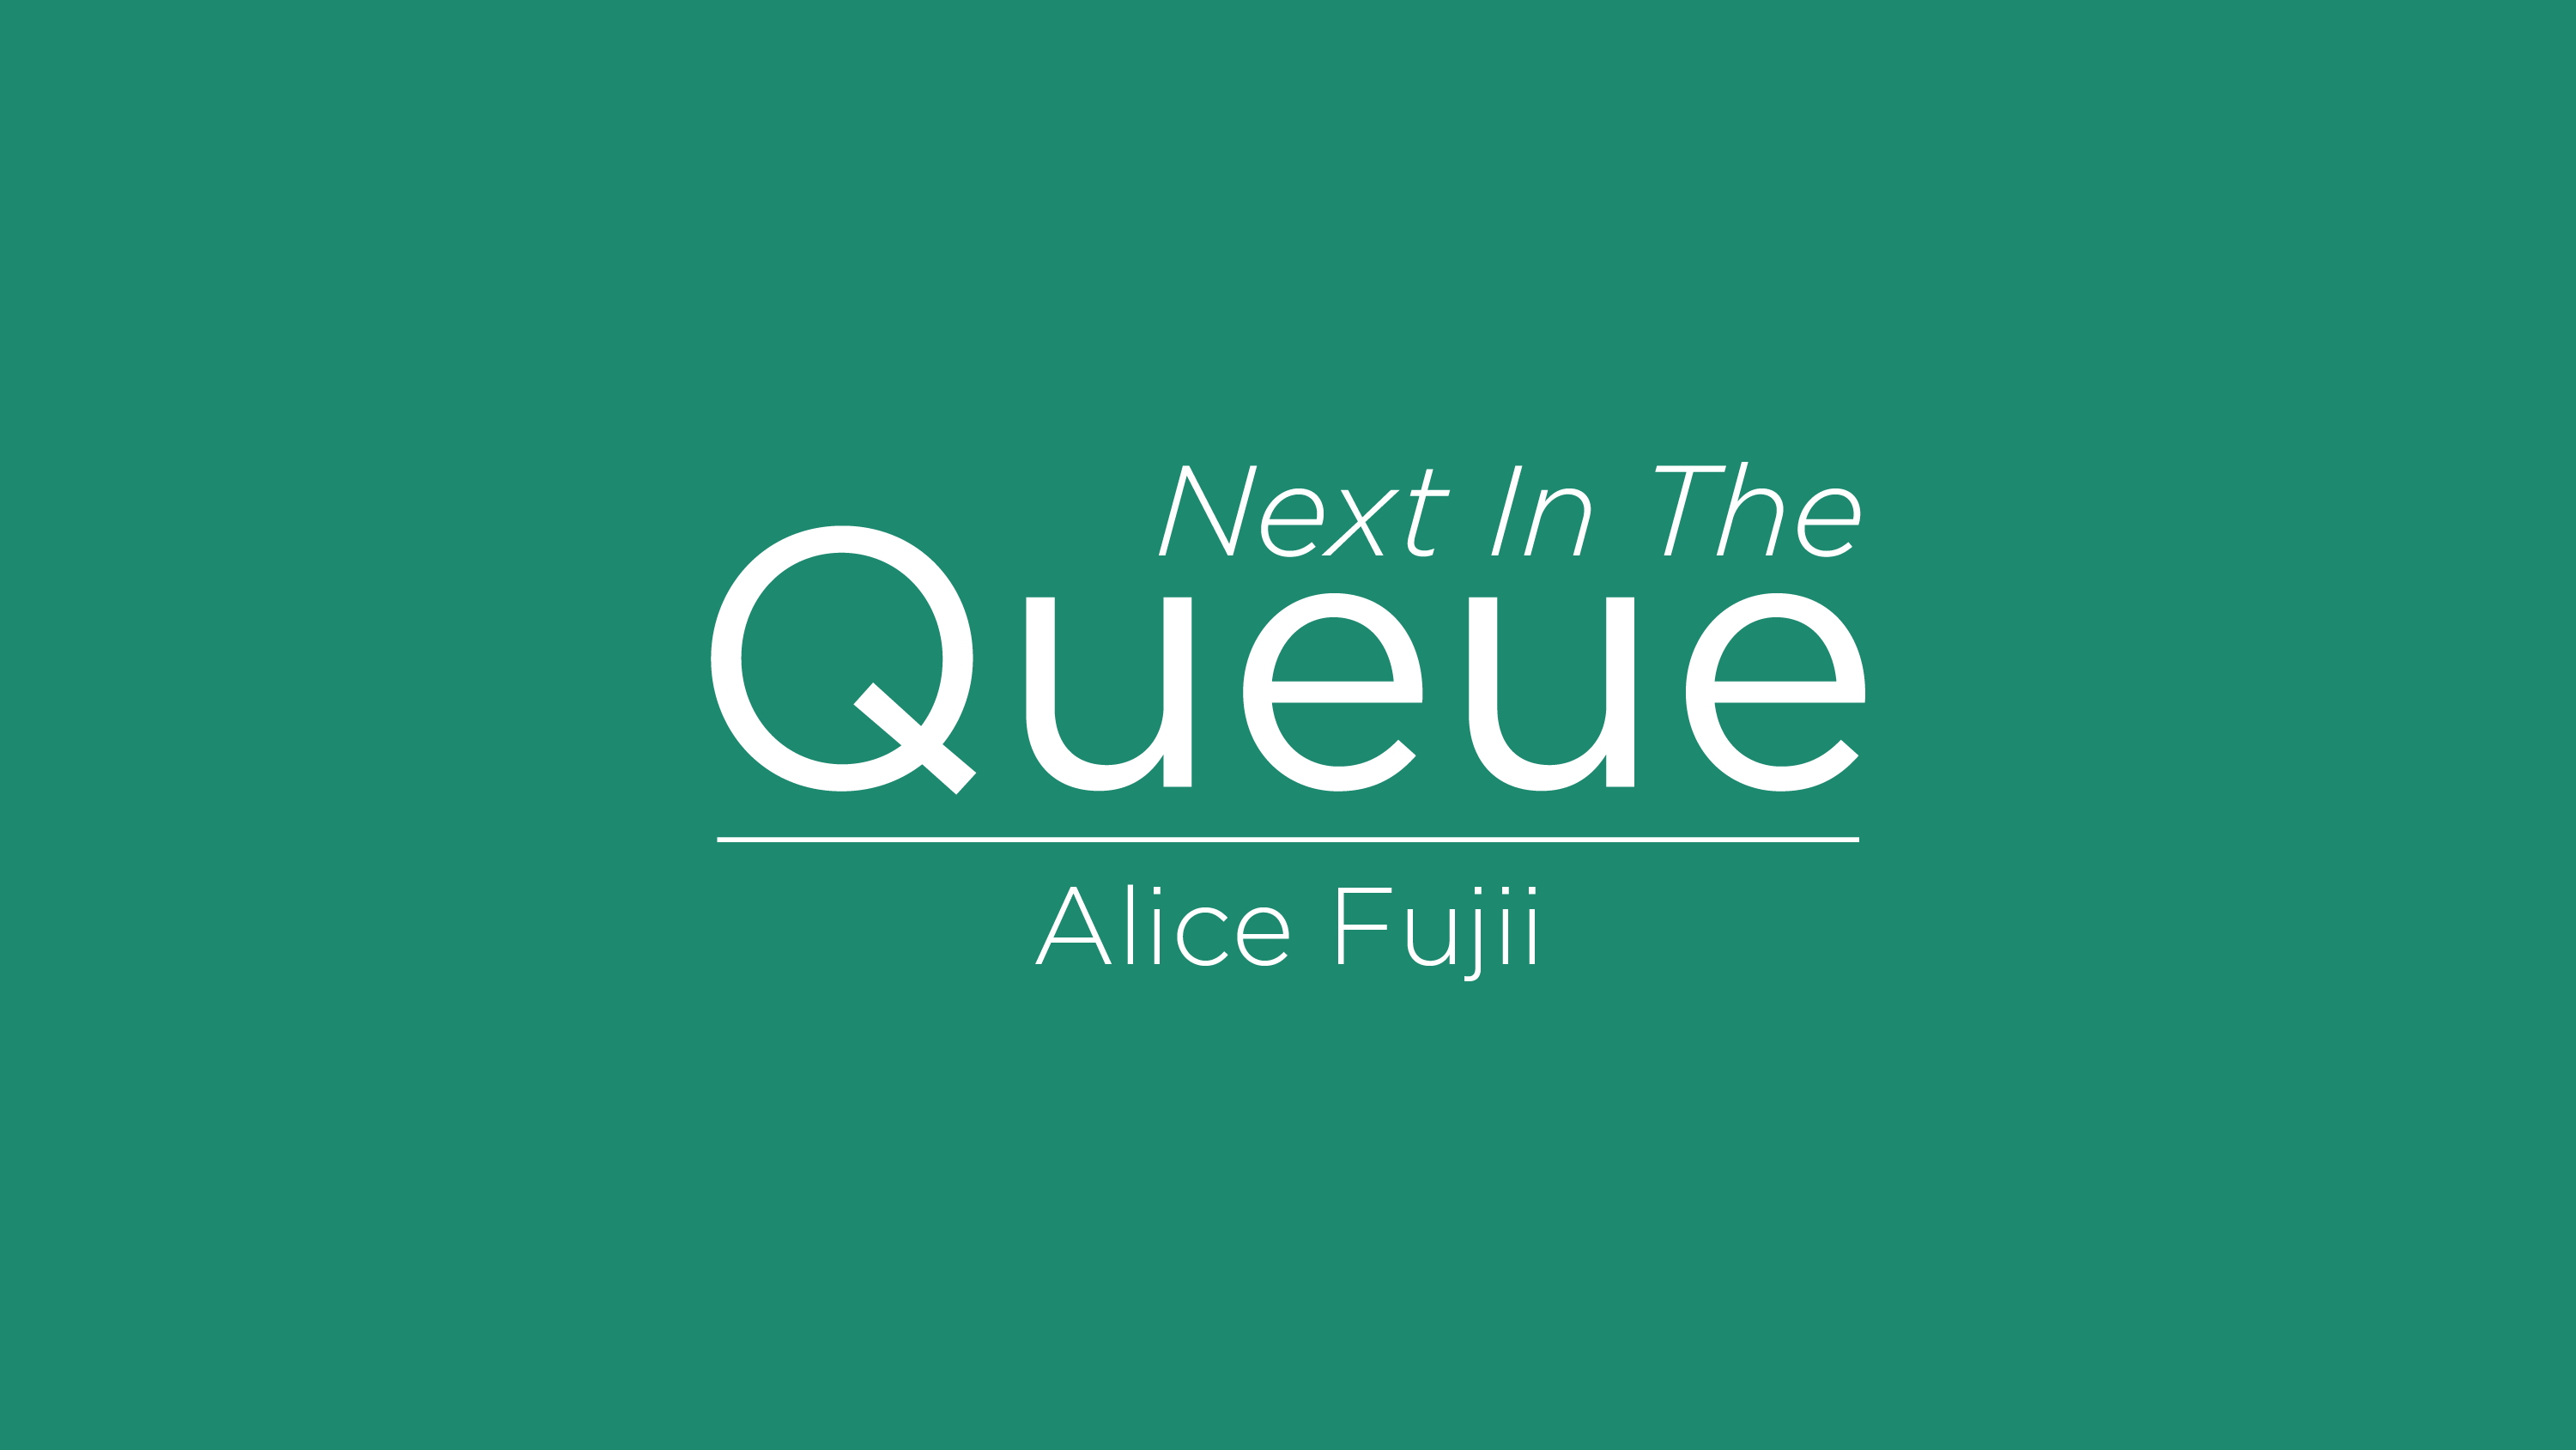 blog post cover graphic for The Queue featuring Alice Fujii